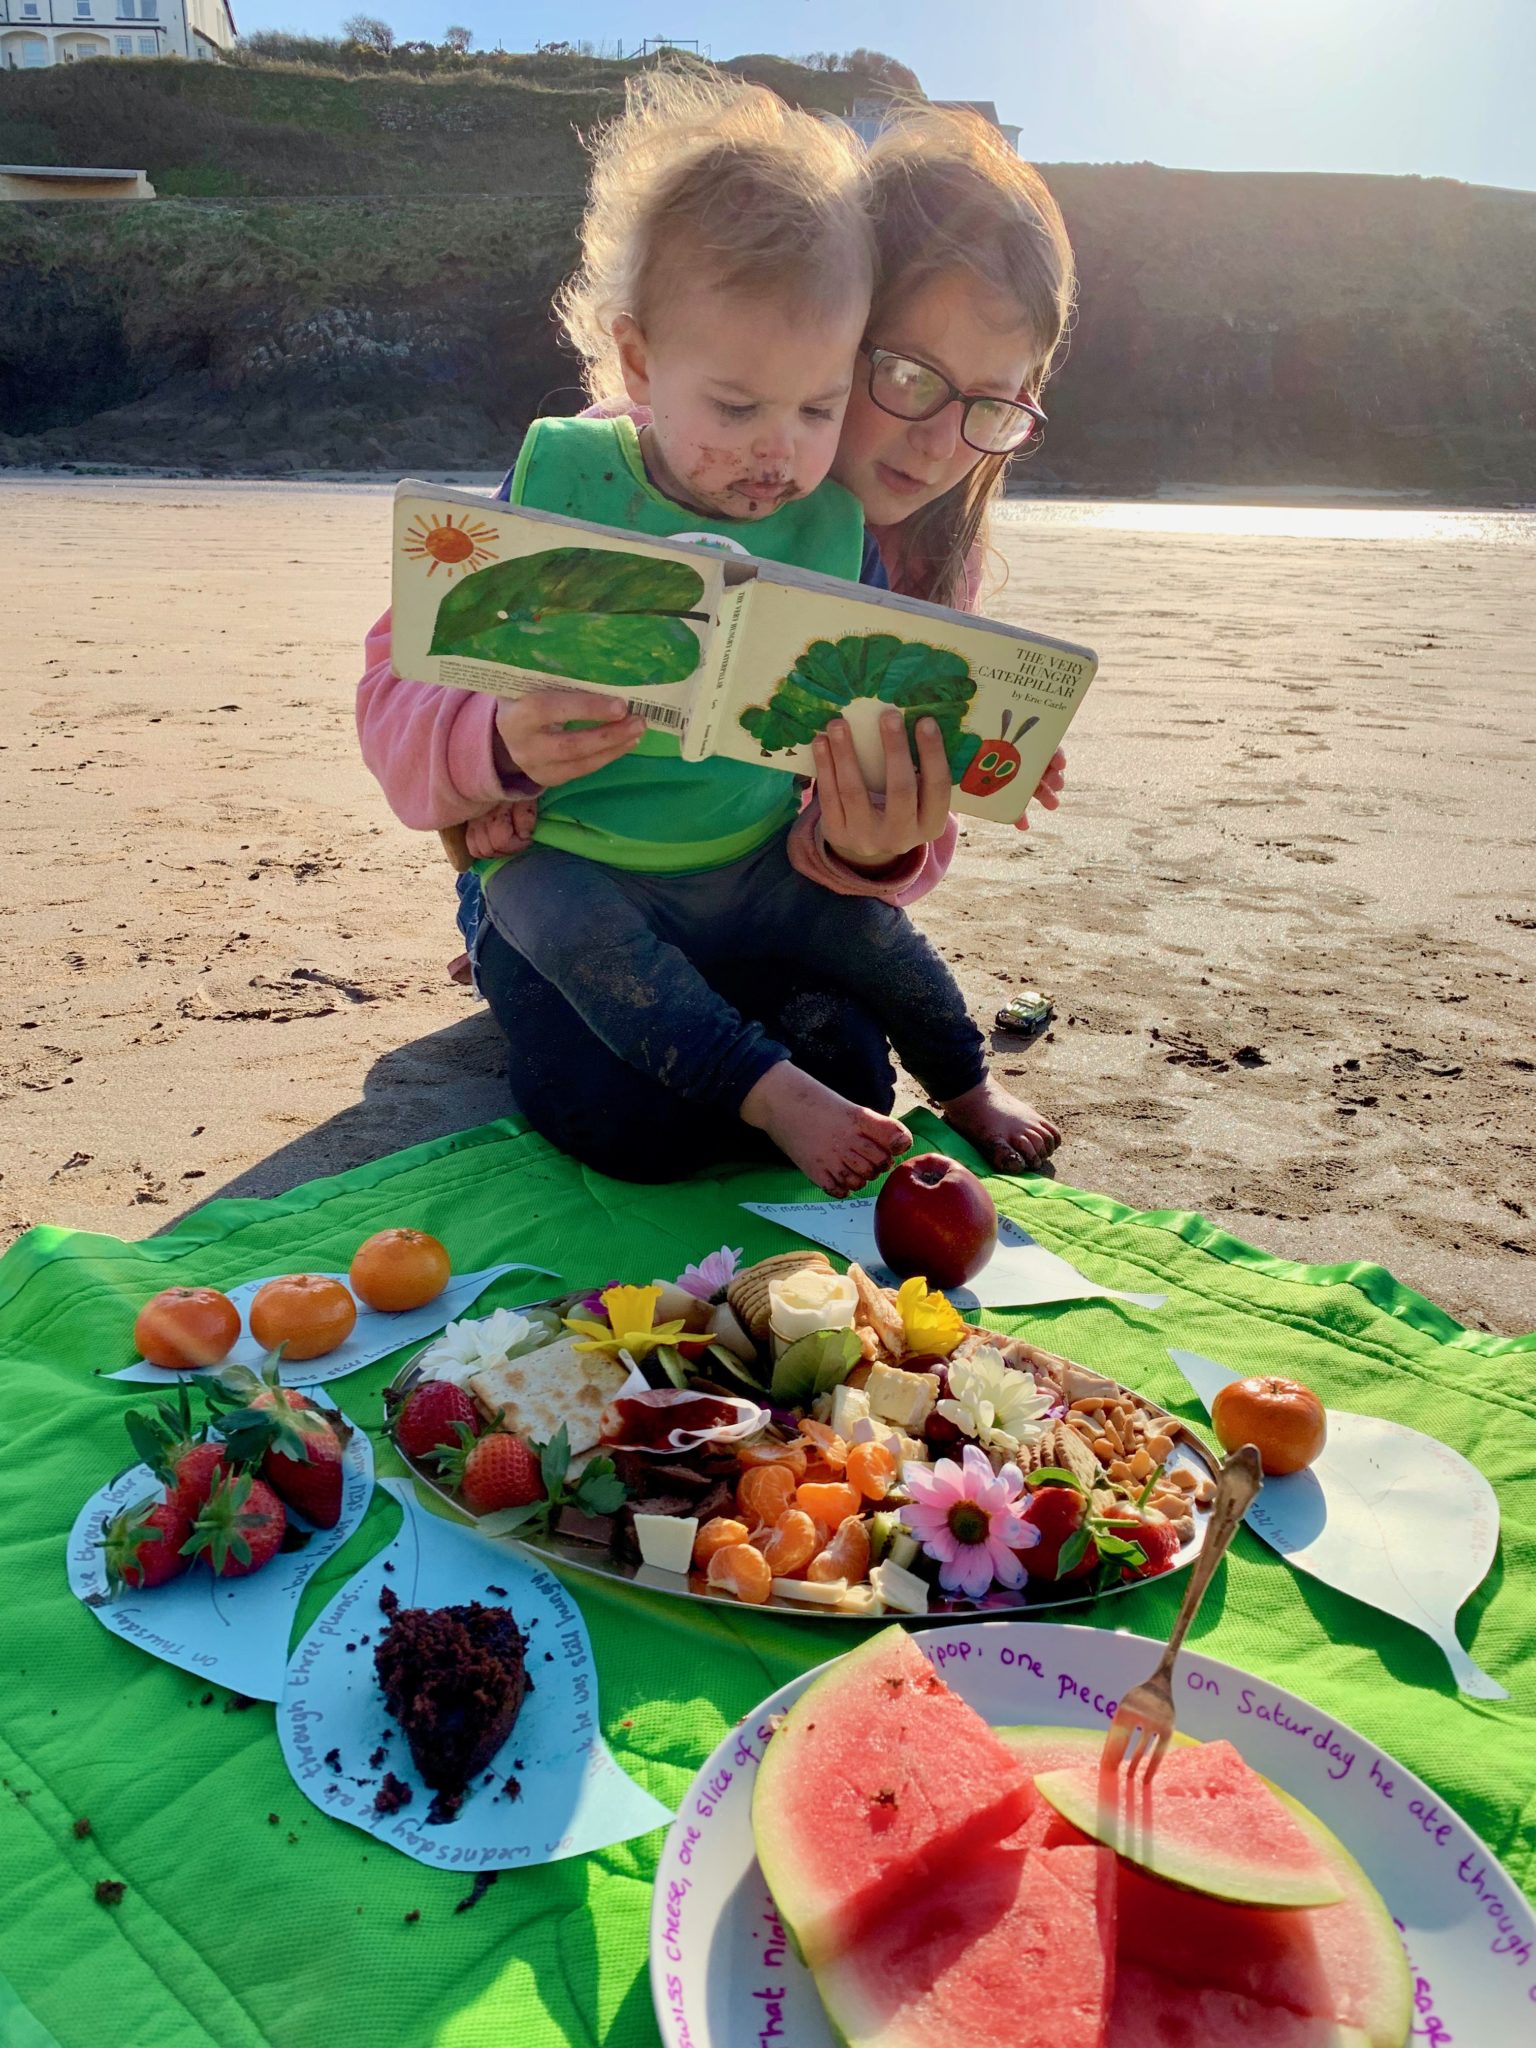 The Very Hungry Caterpillar Picnic